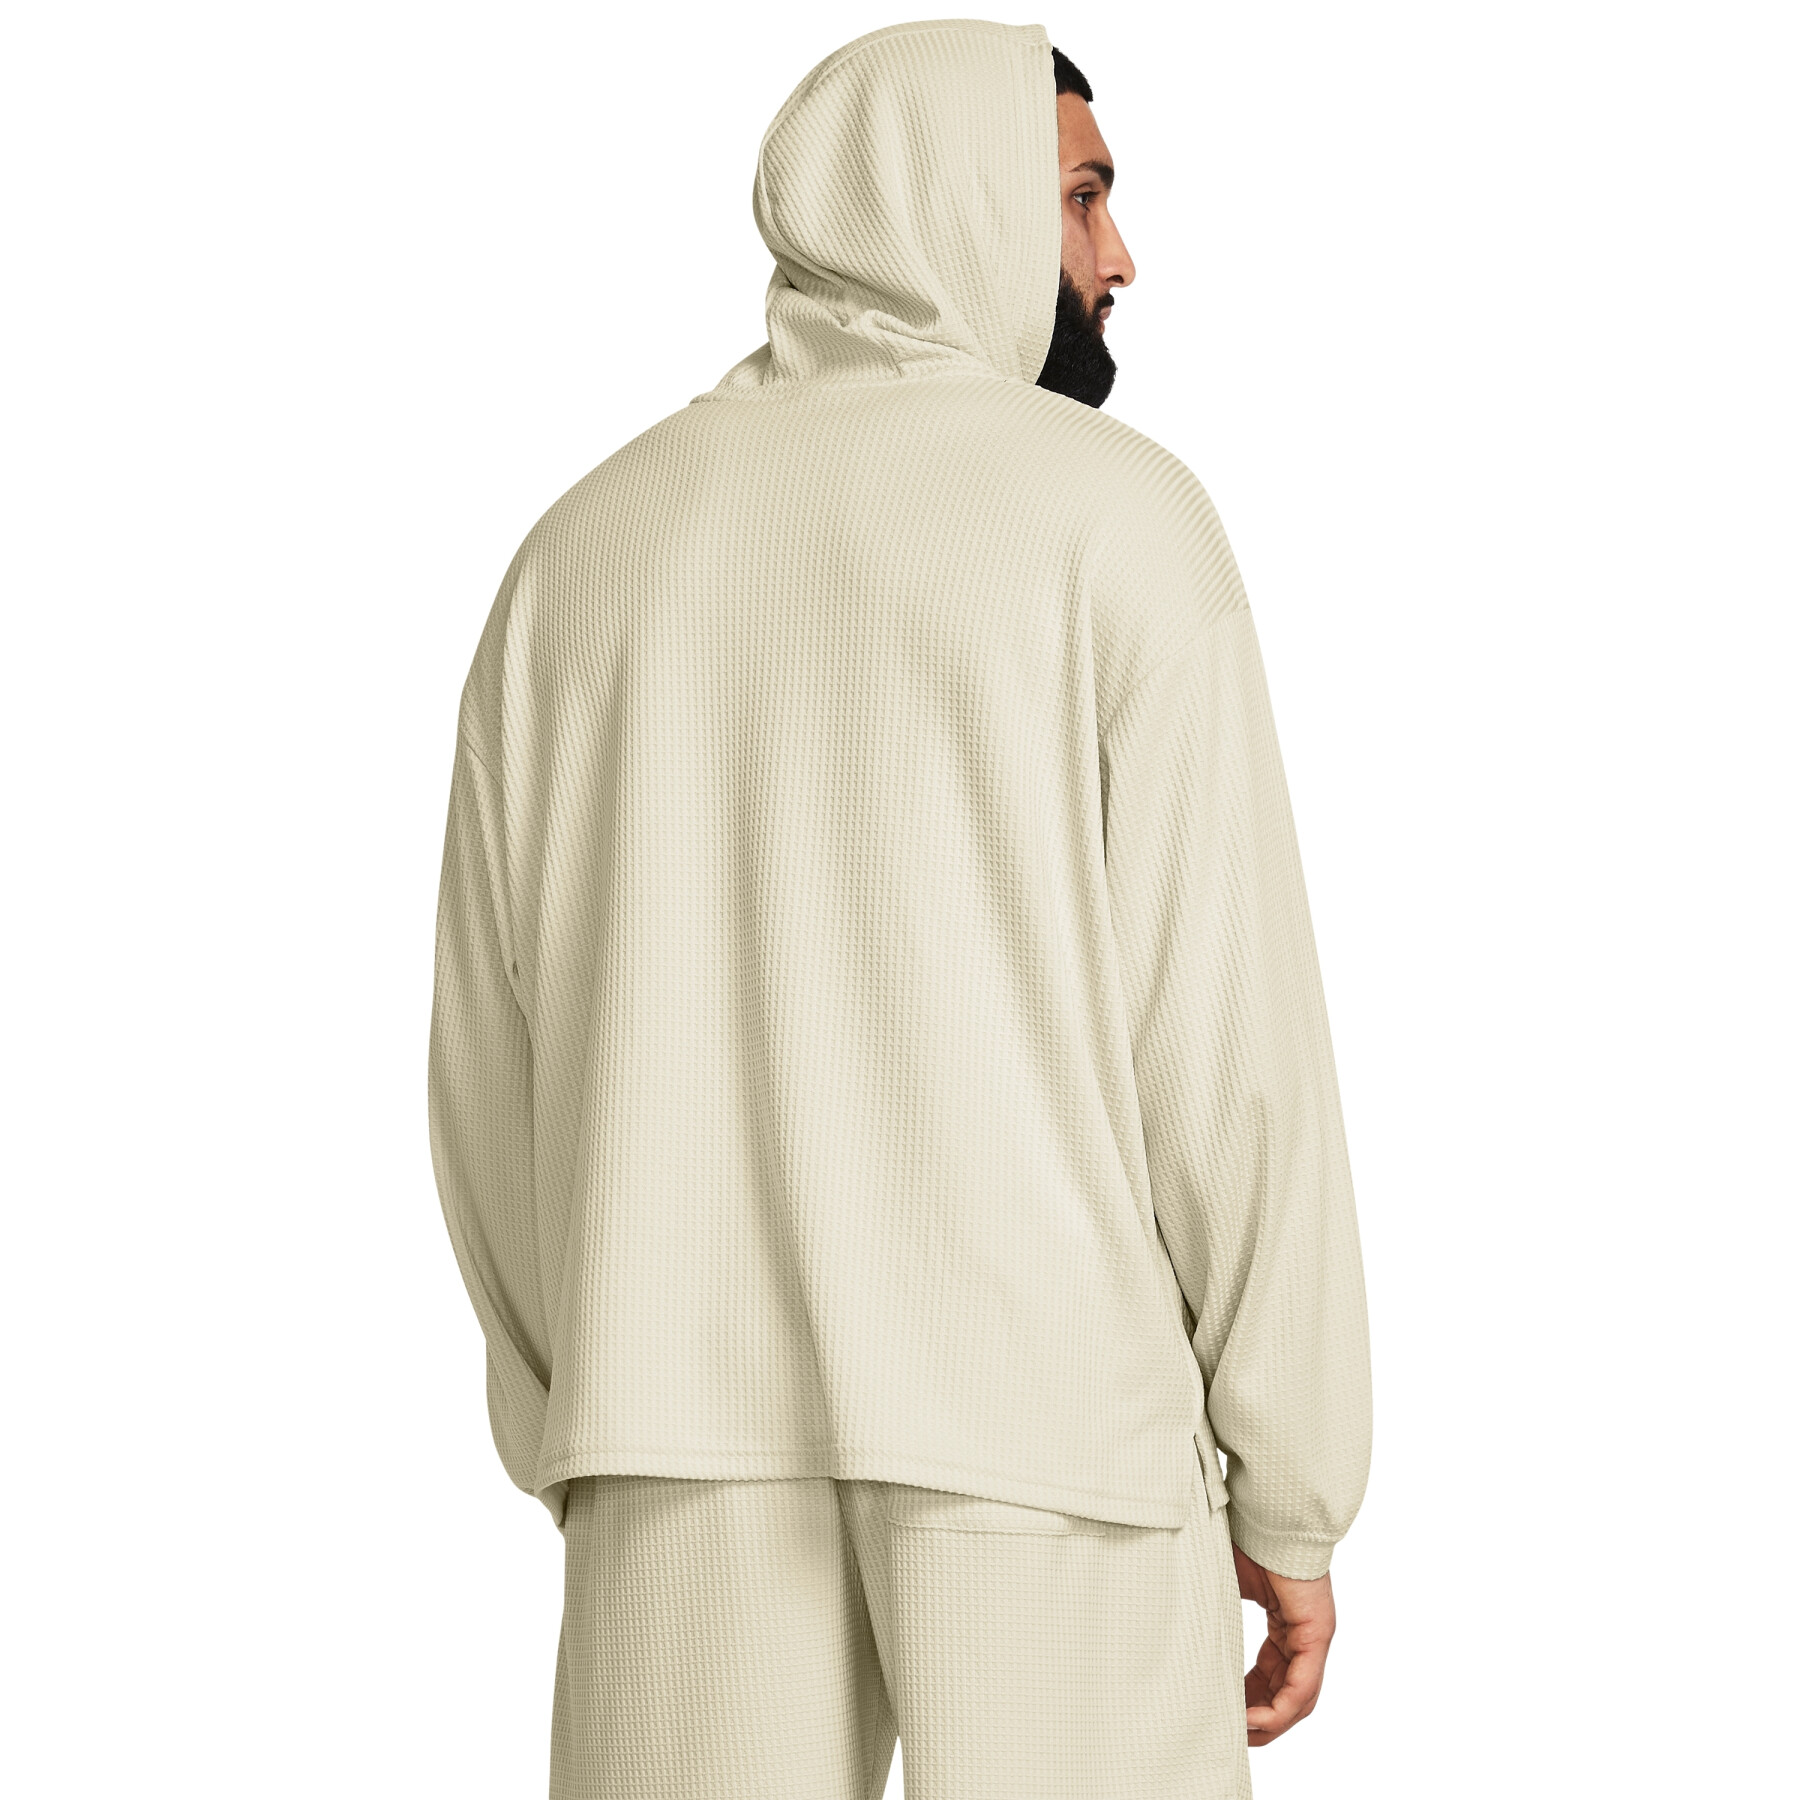 Hooded sweatshirt Under Armour Rival Waffle